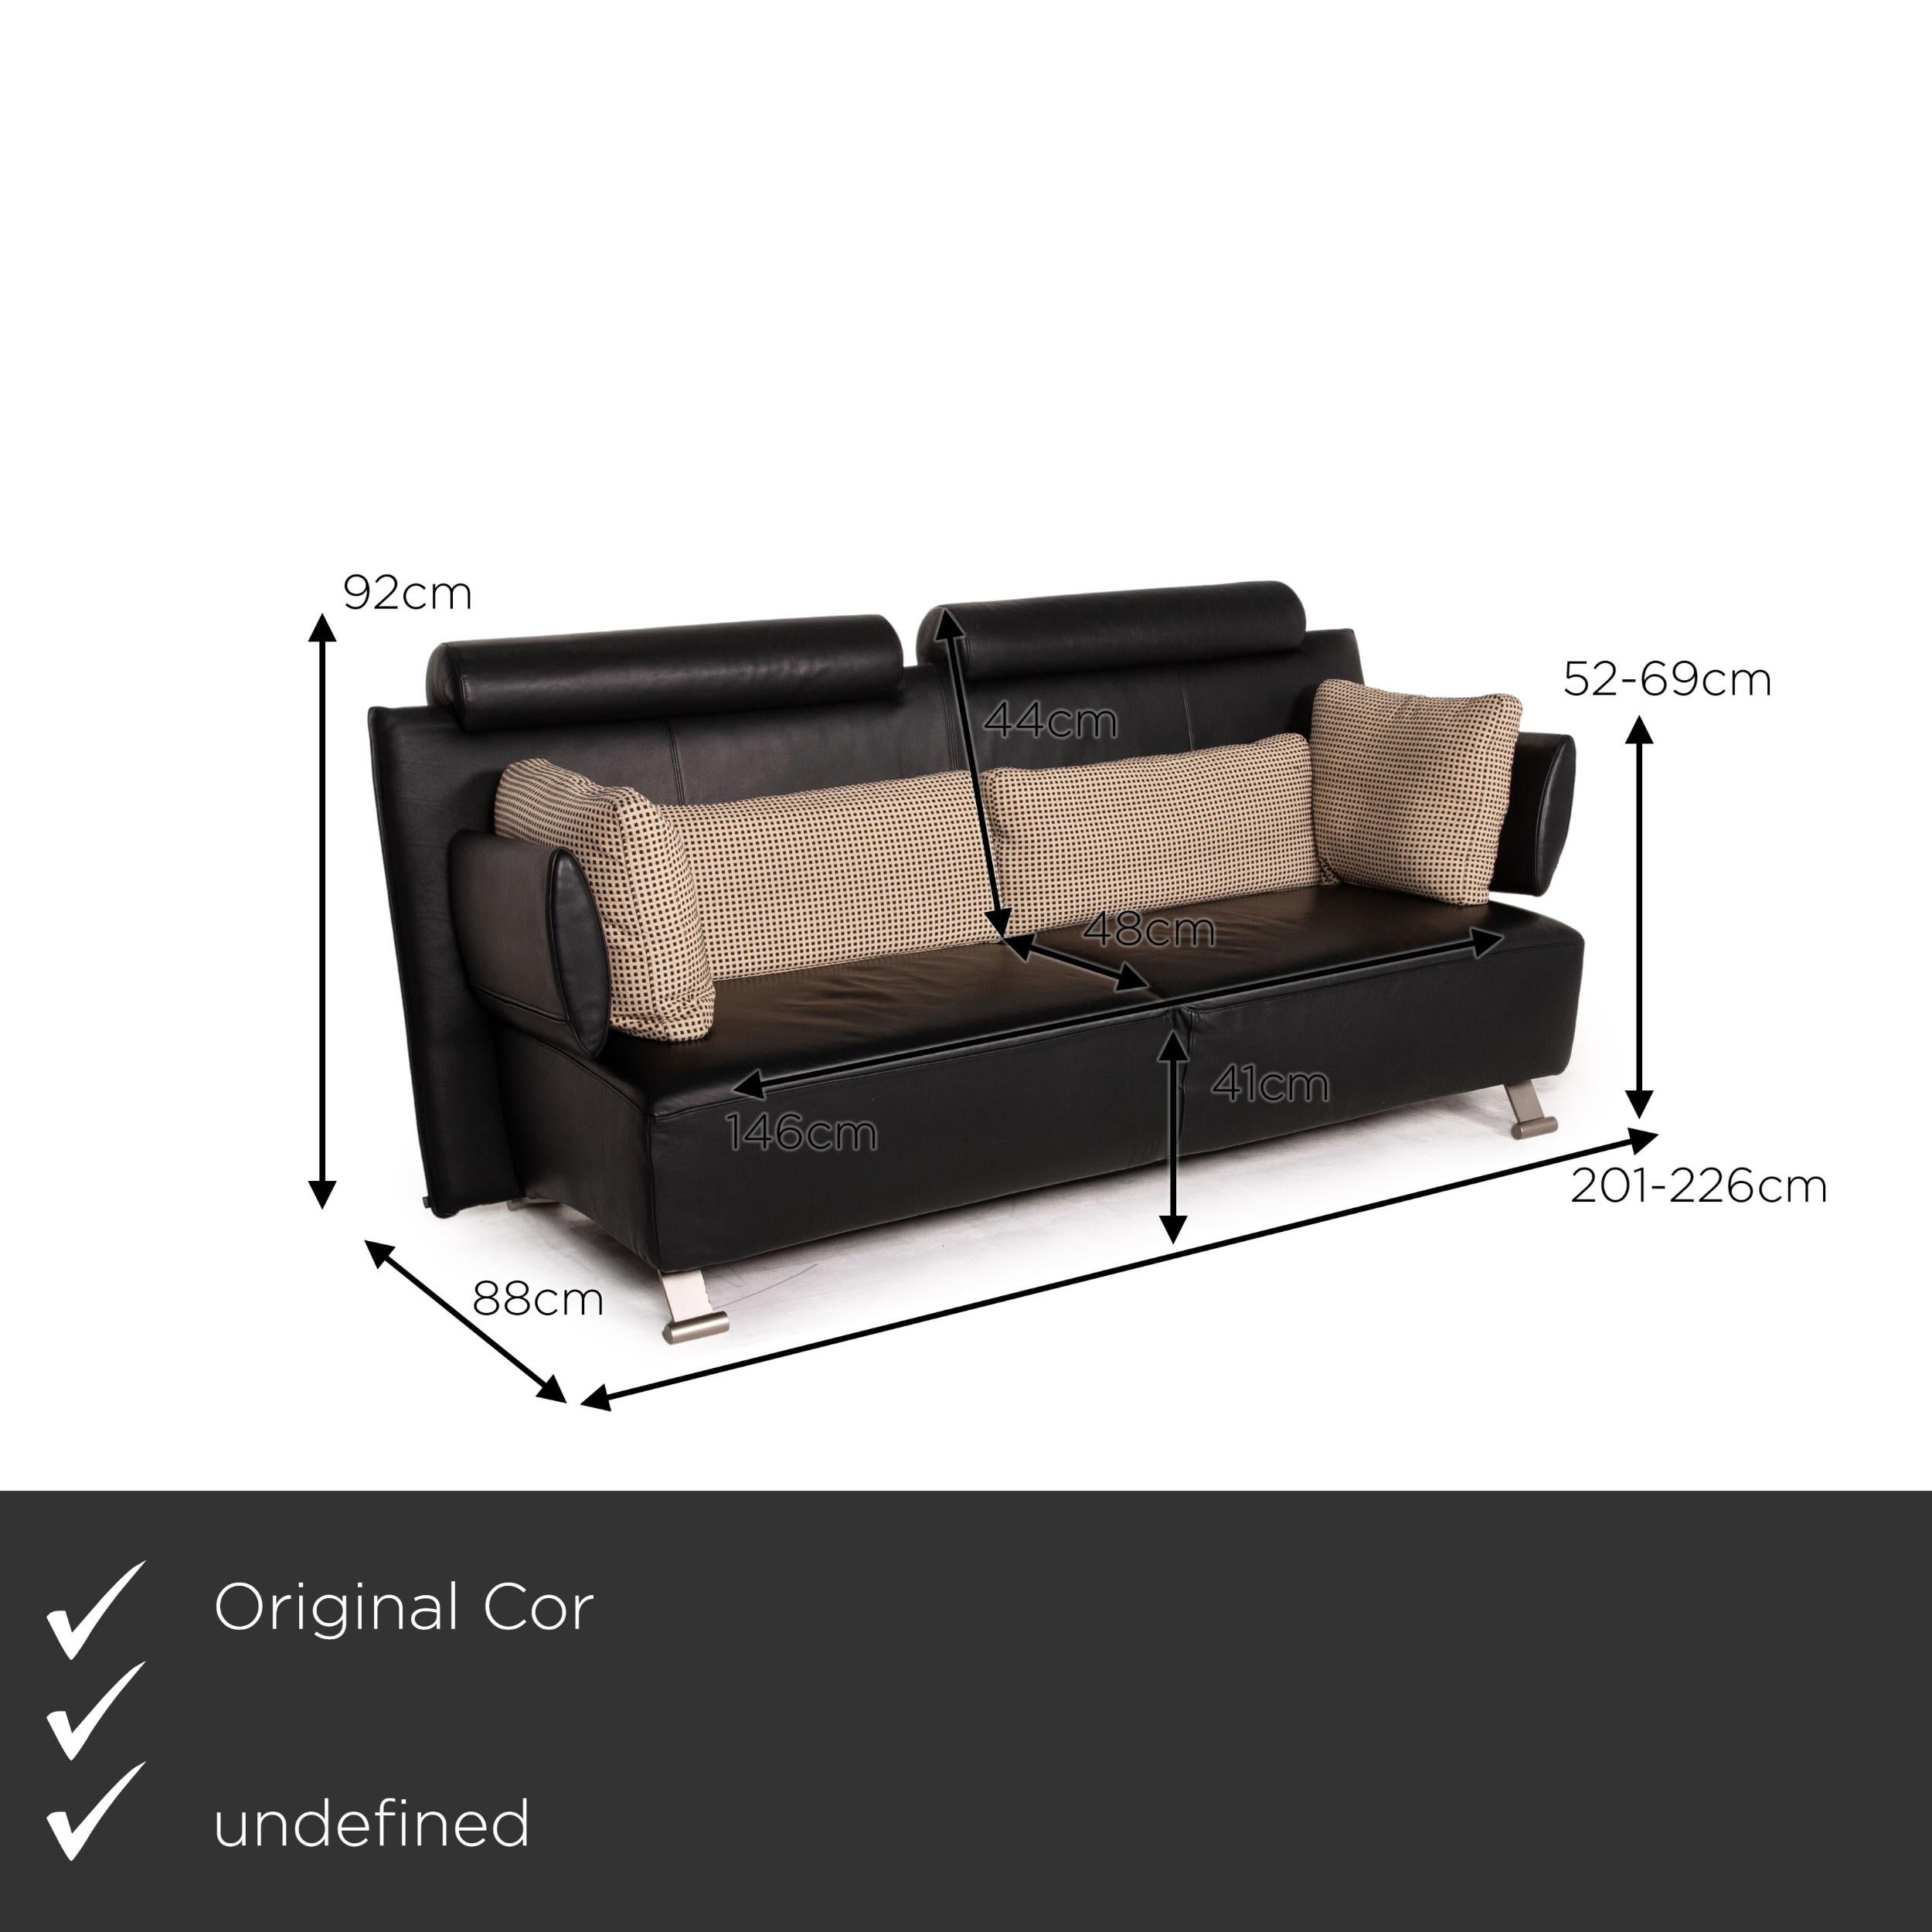 We present to you a COR Sera leather sofa set black 2x two-seater function.

 

 Product measurements in centimeters:
 

 depth: 88
 width: 201
 height: 92
 seat height: 41
 rest height: 52
 seat depth: 48
 seat width: 146
 back